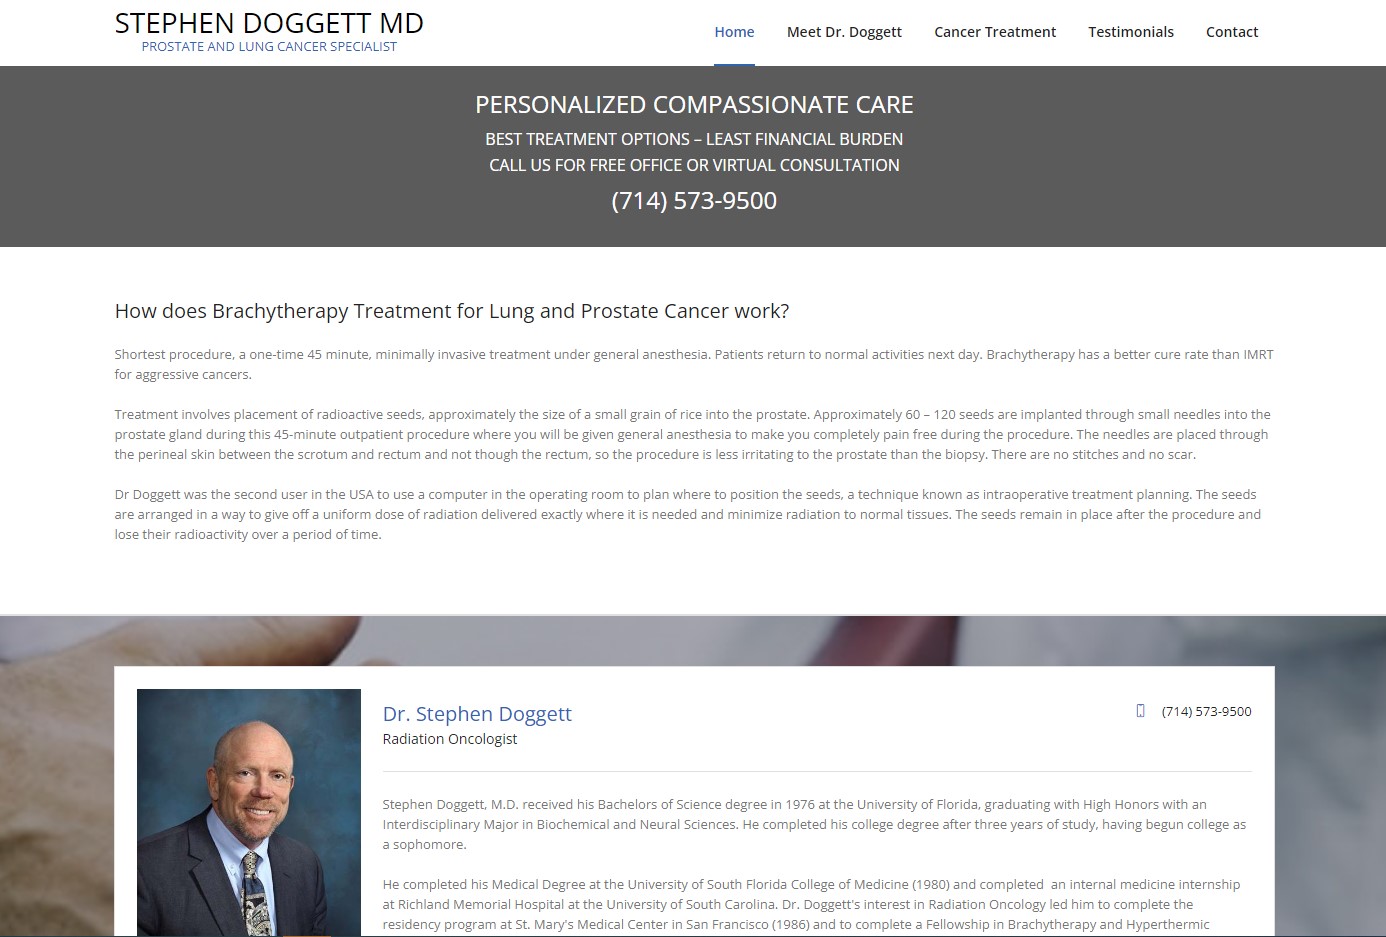 Stephen Dogget MD - No Cancer